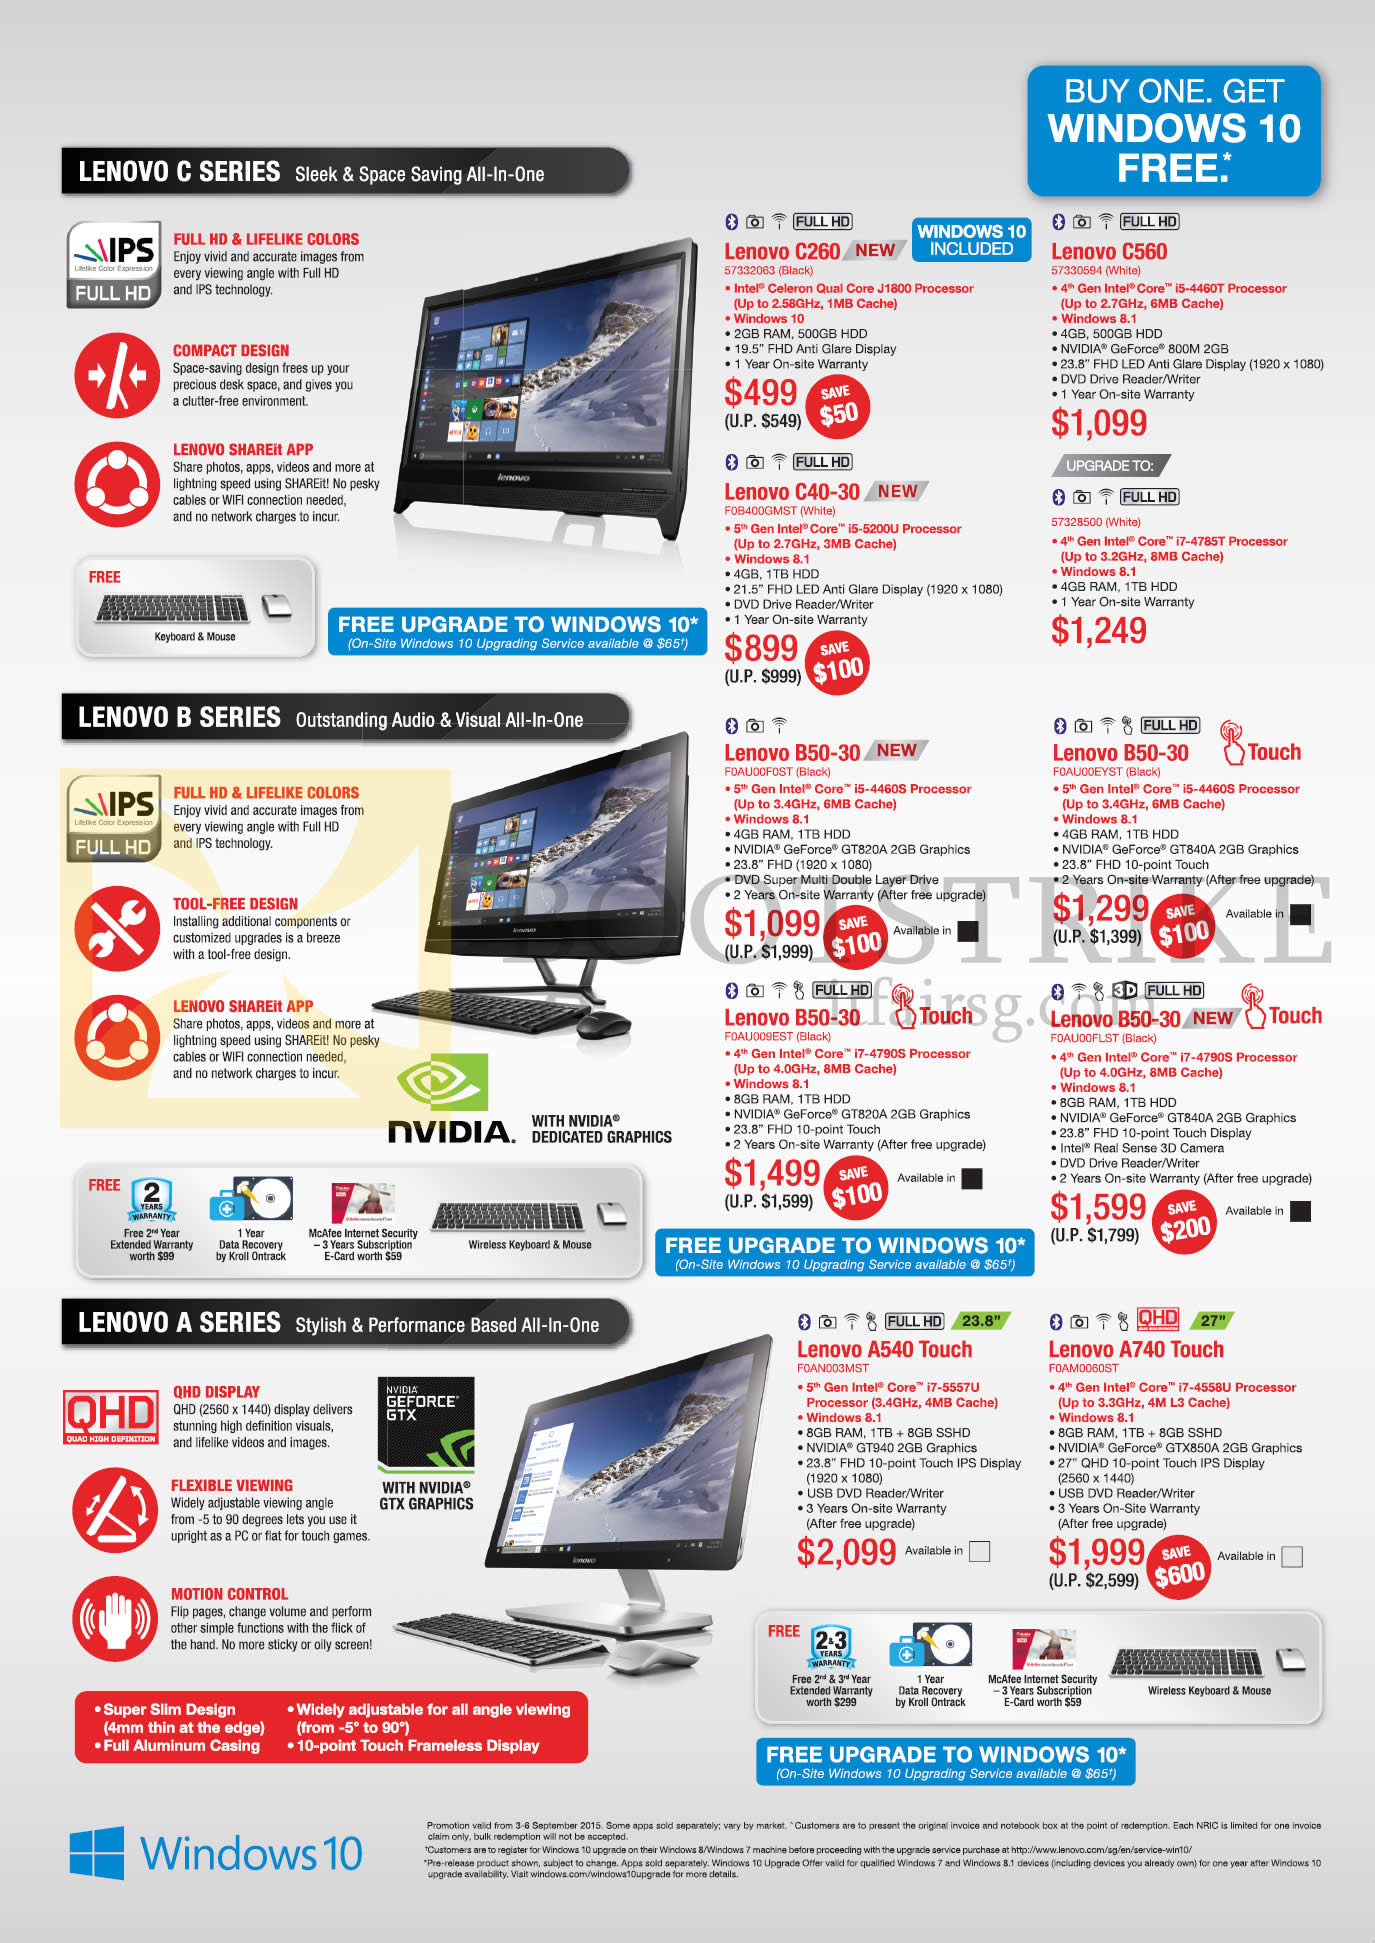 COMEX 2015 price list image brochure of Lenovo Desktop PCs C260 57332063, C560 57330594, C40-30 F0B400GMST, 57328500, B50-30 F0AU00F0ST, F0AU00EYST, A540 Touch F0A003MST, A740 Touch F0AM0060ST